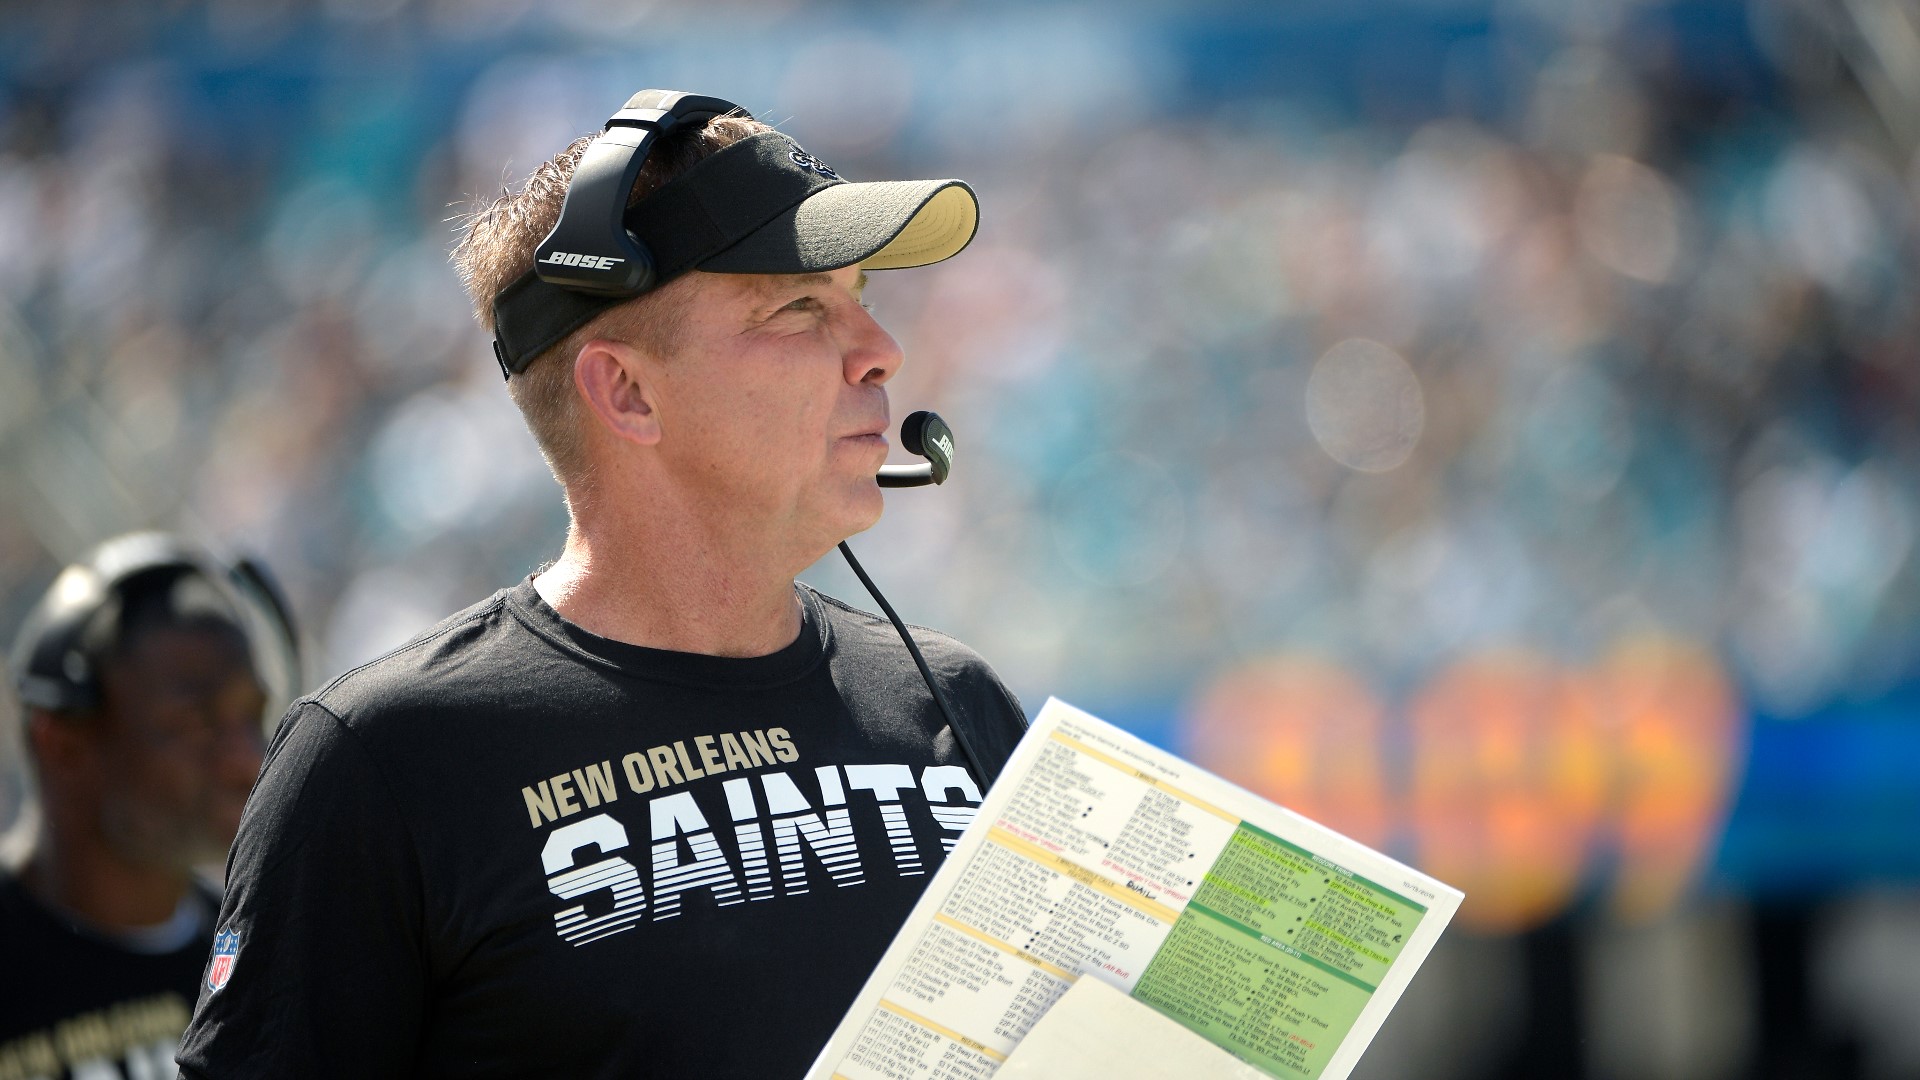 The Saints scored 36 and even though Payton probably won't win NFL coach of the year. If there's anyone doing as good a job as he is I'd like to see it.